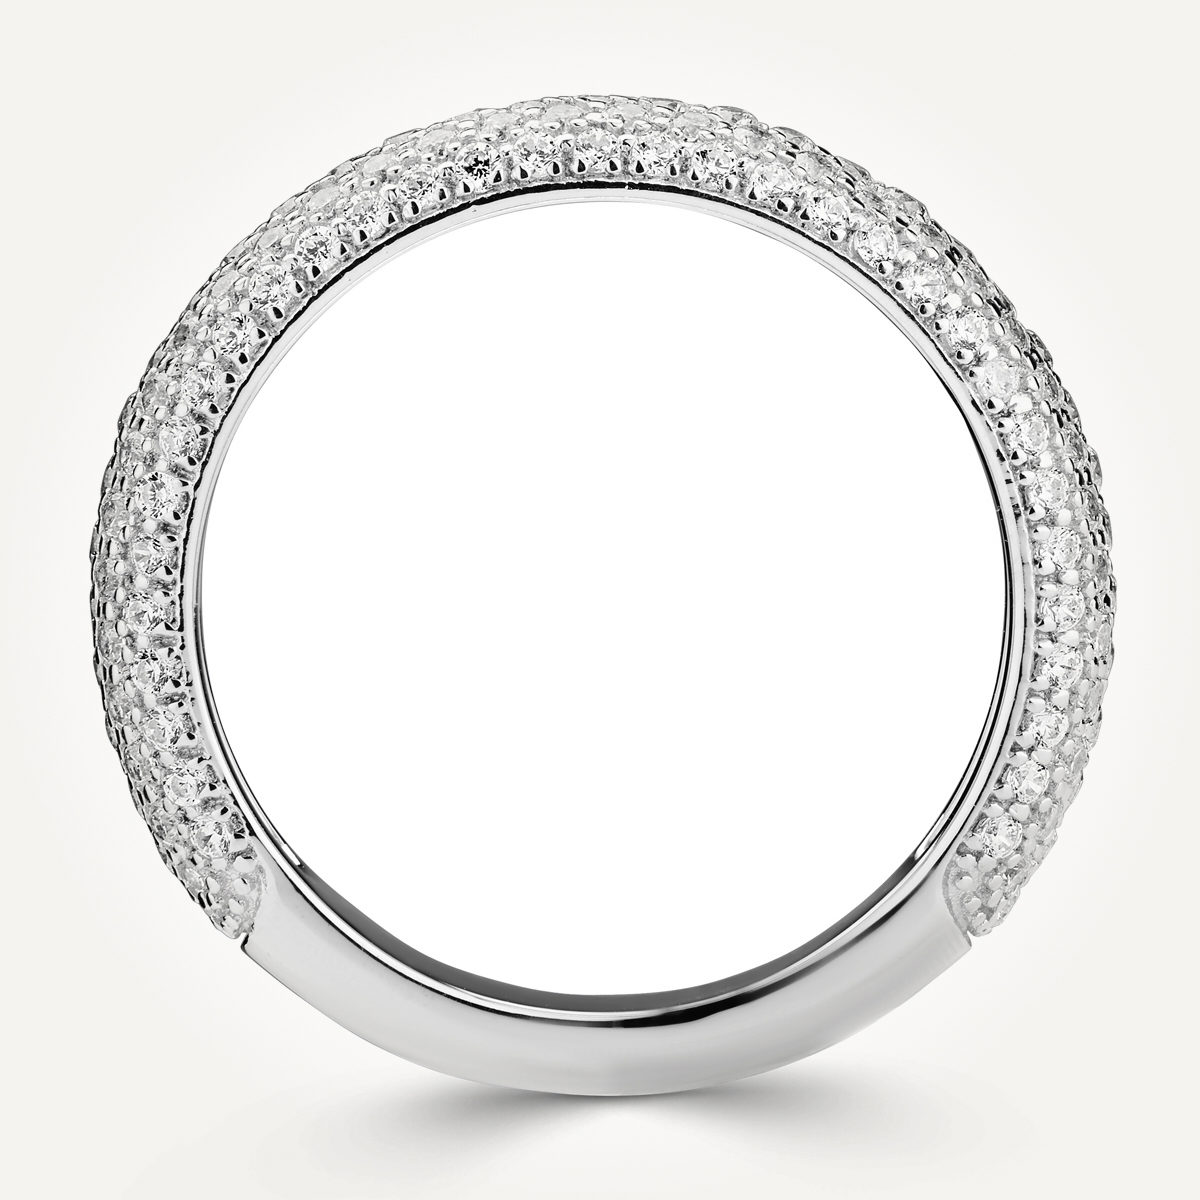 14KT White Gold Multi Stone Pave Ring